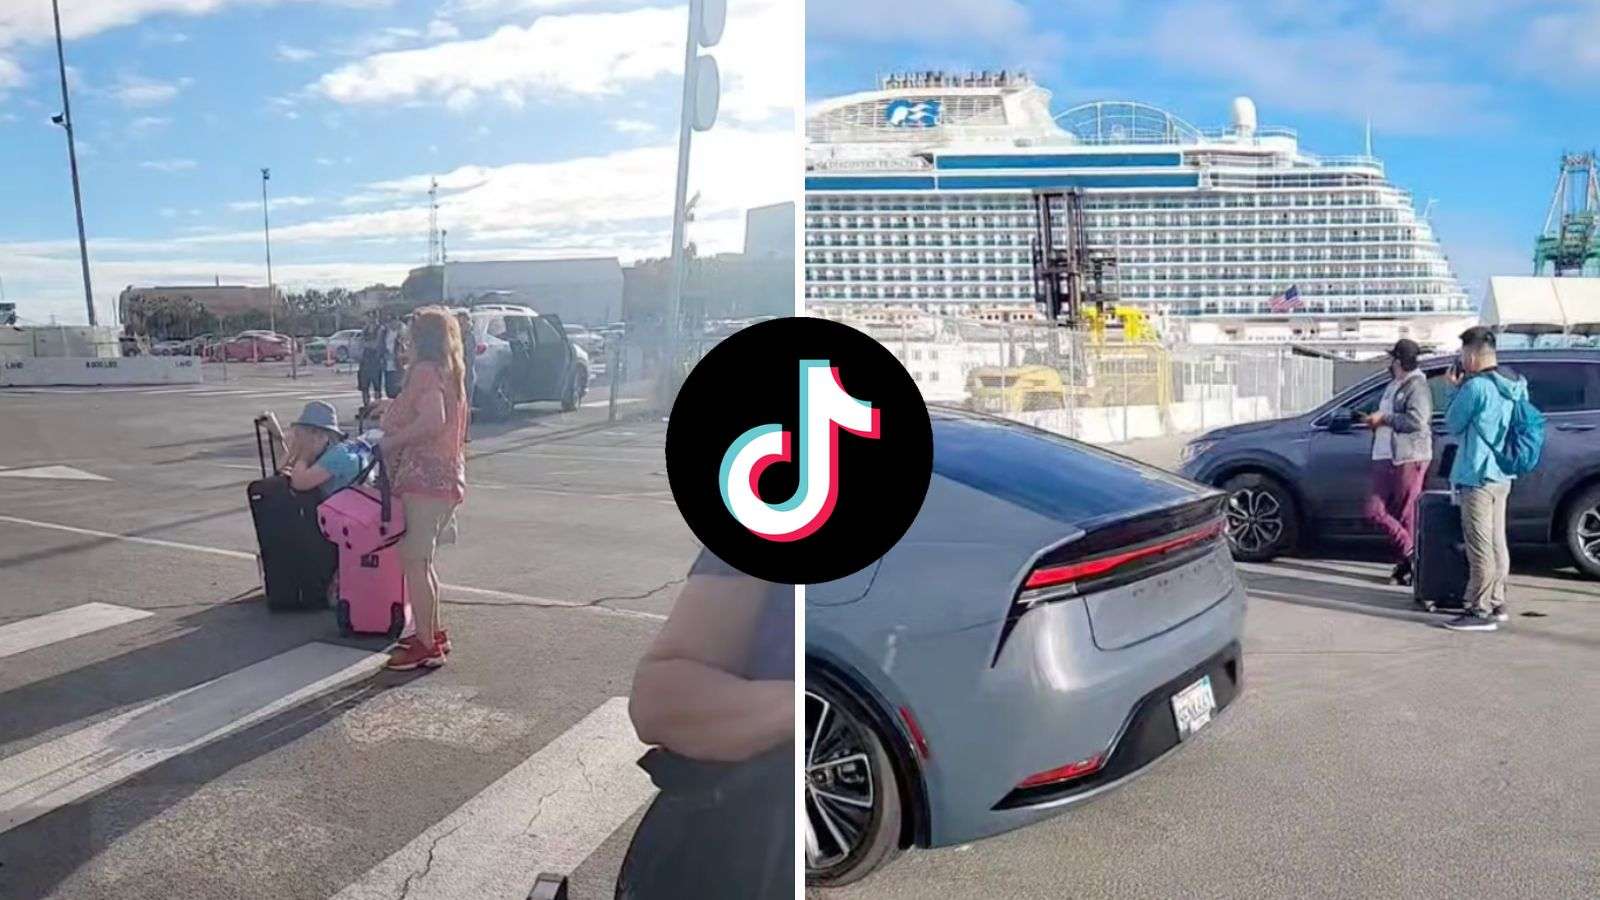 TikToker watches cruise leave without her after arriving 20 minutes late